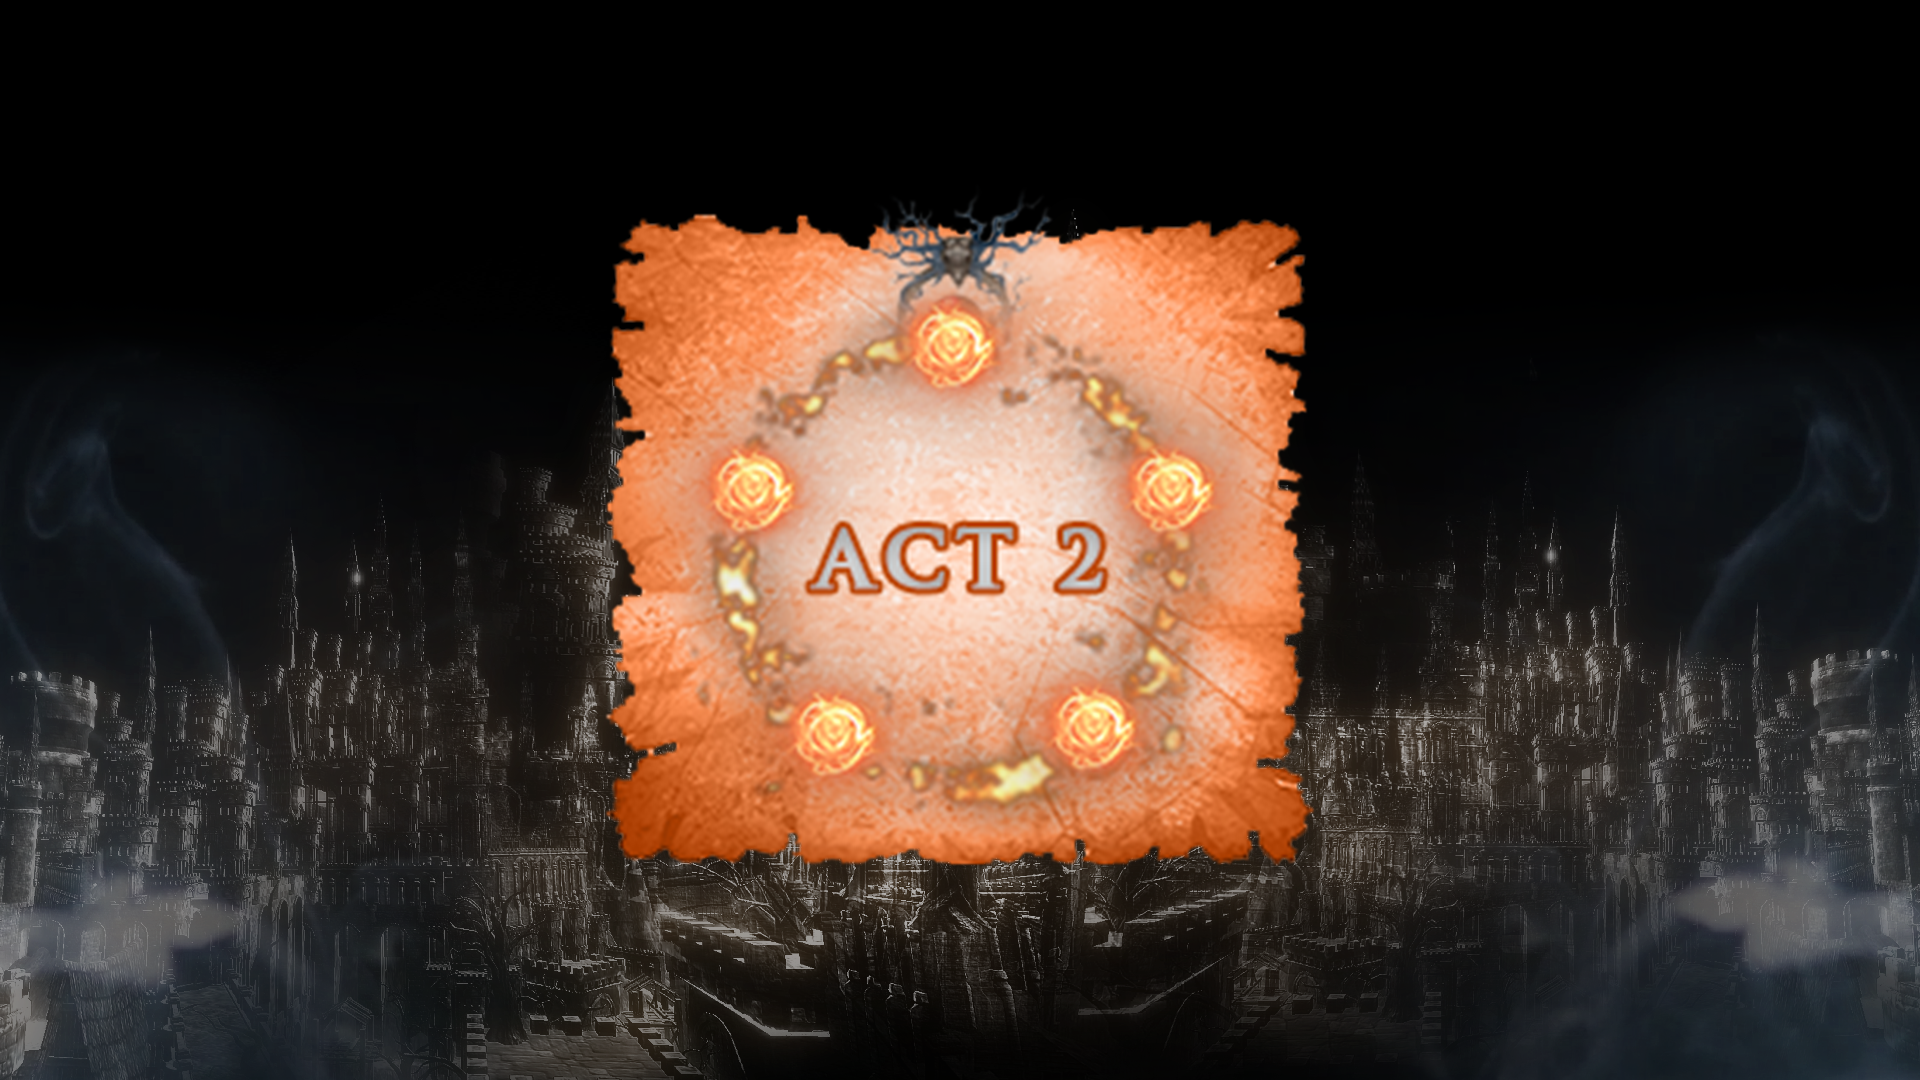 Icon for Act 2 Hard 5 Star